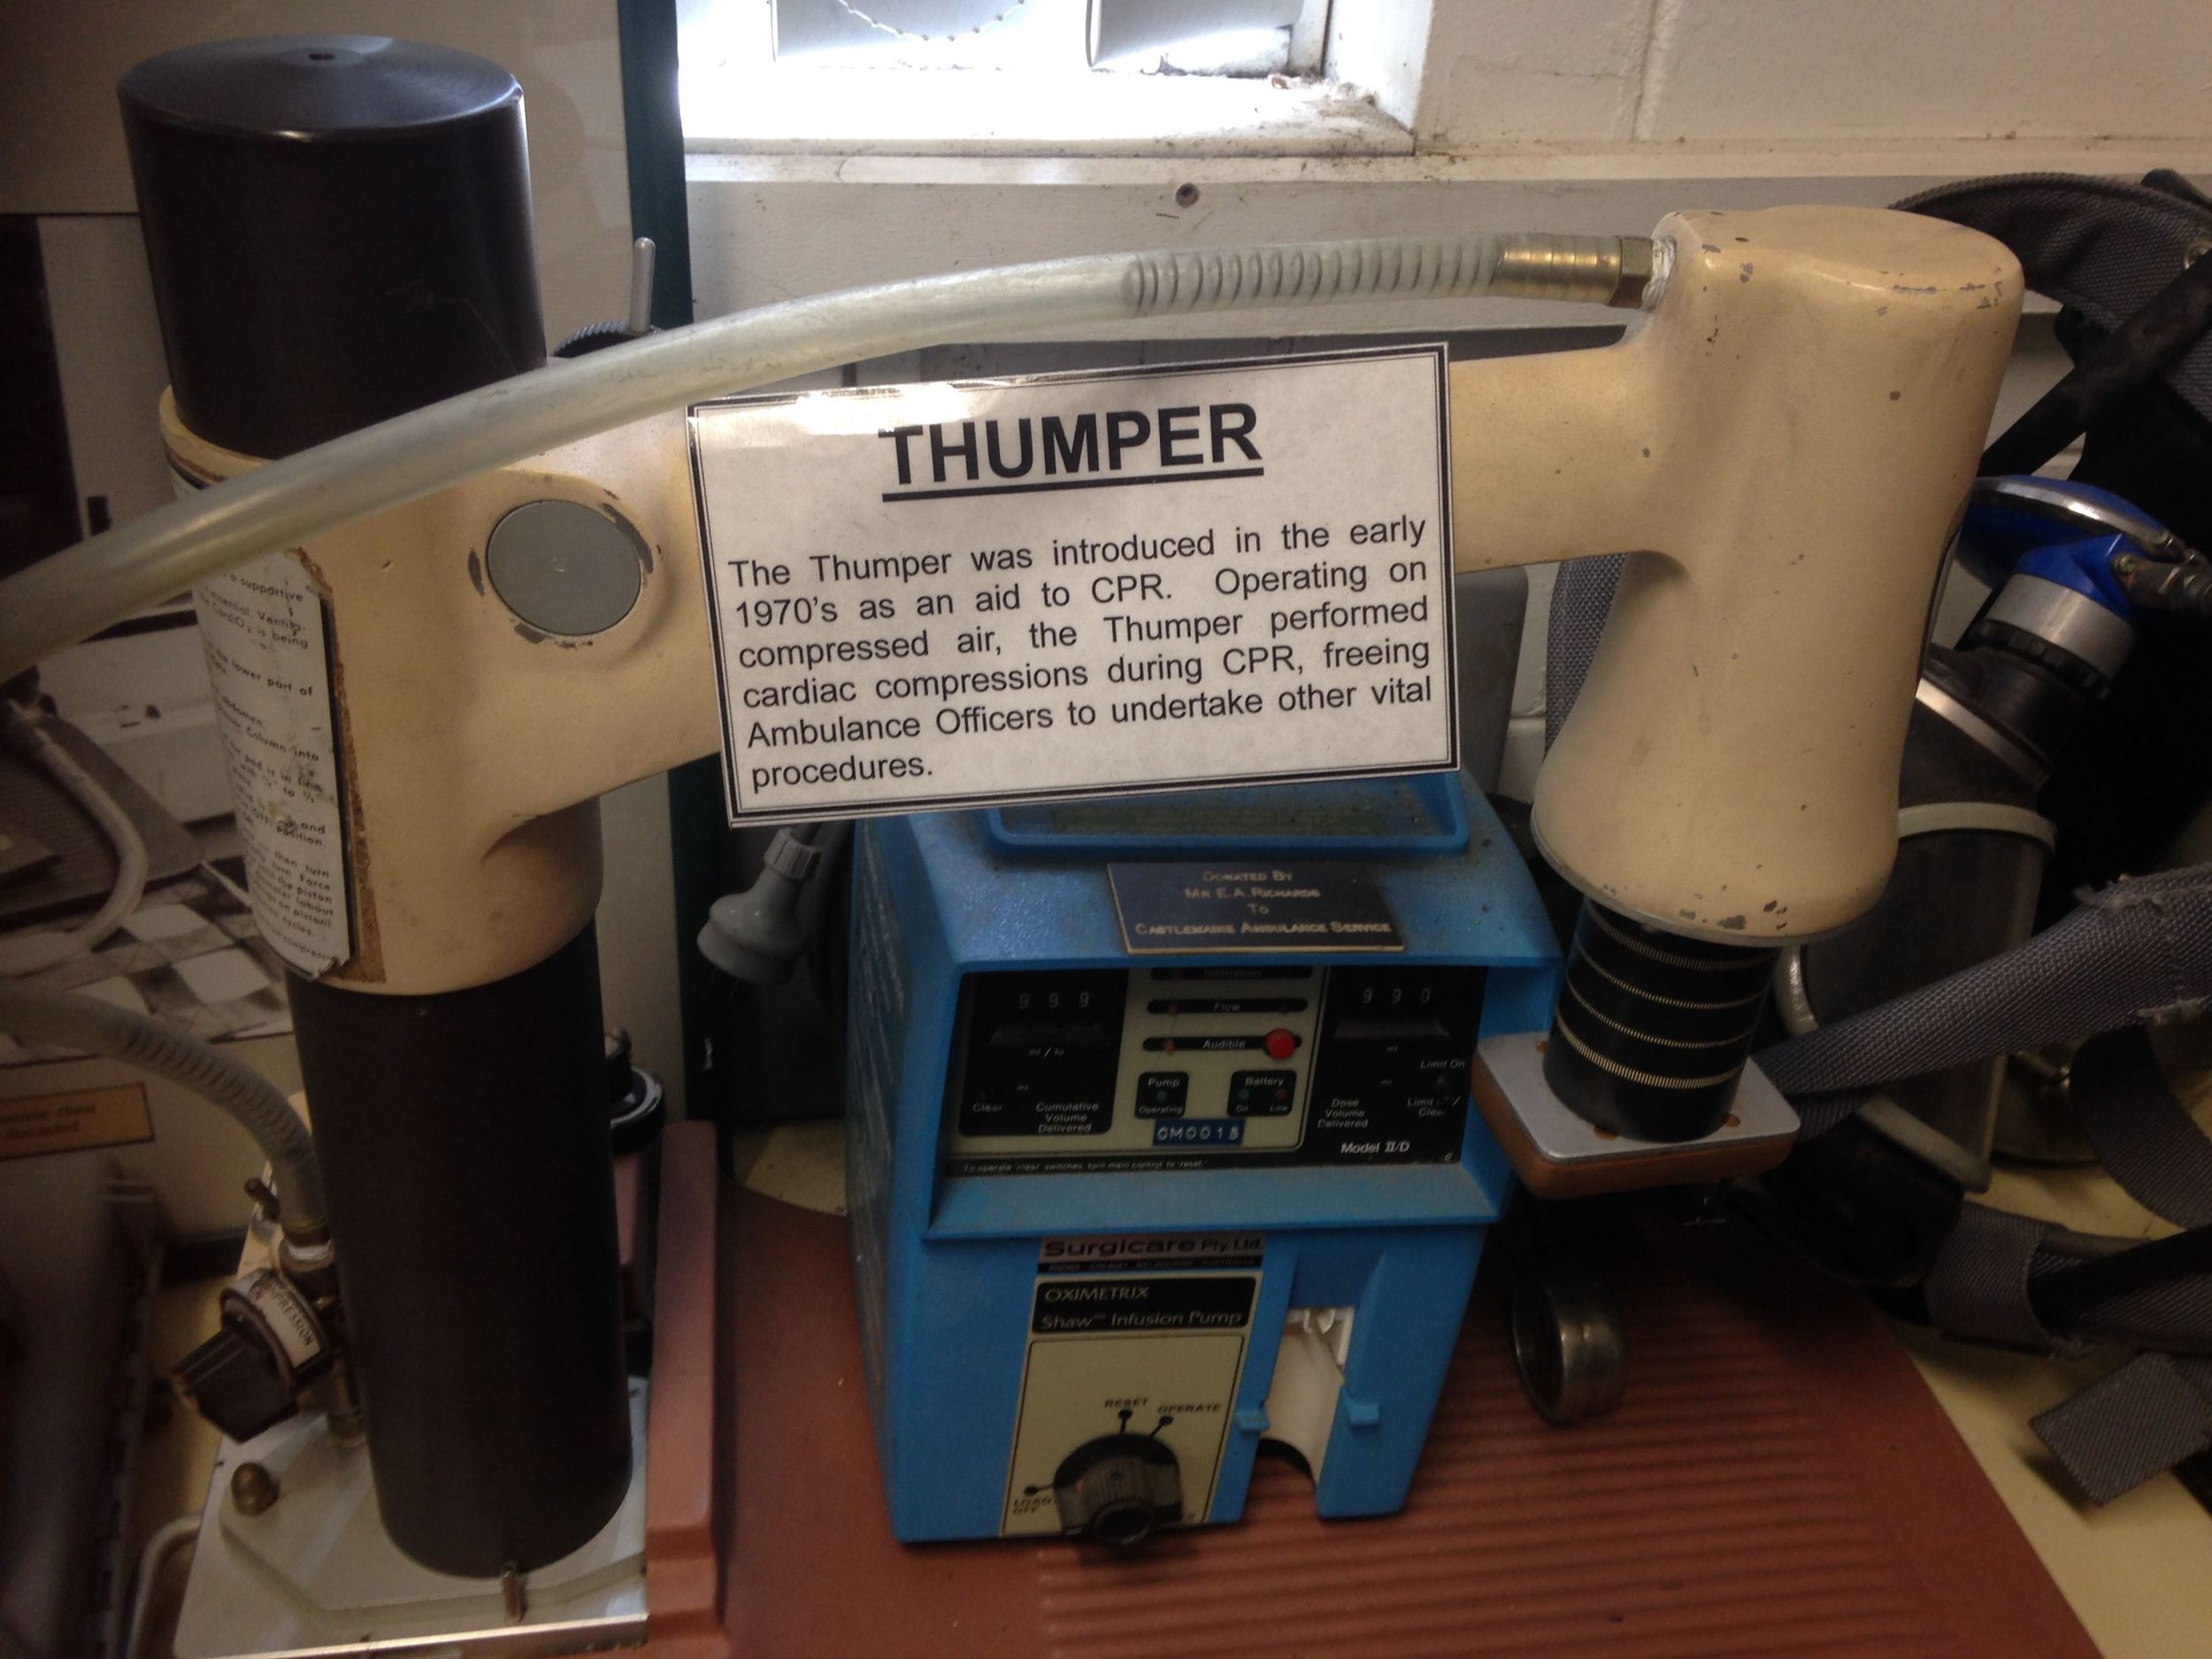  The Thumper was introduced in the early 1970s as an aid to CPR. Operating on compressed air, it performed cardiac compression during CPR, freeing Ambulance Officers to undertake other vital procedures 